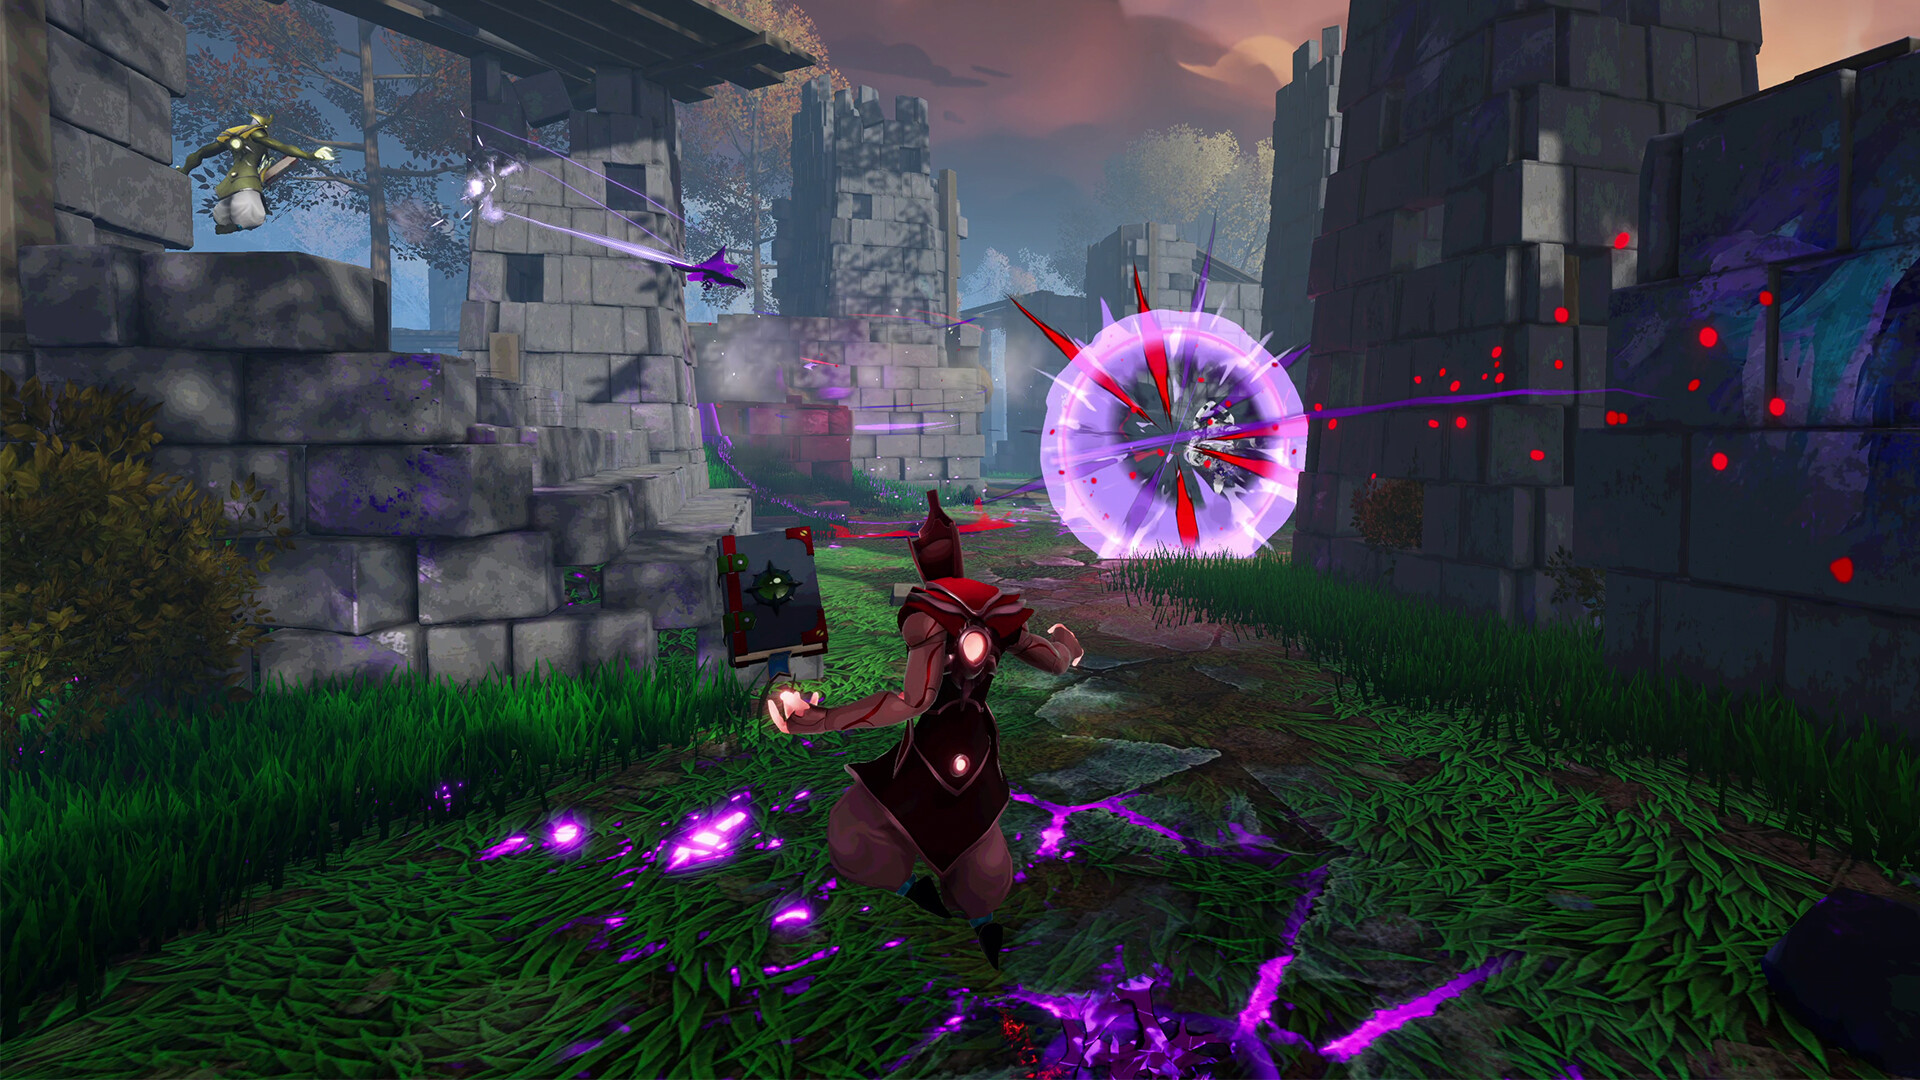 A red robed figure fighting amid castle ruins casing an explosive purple ball